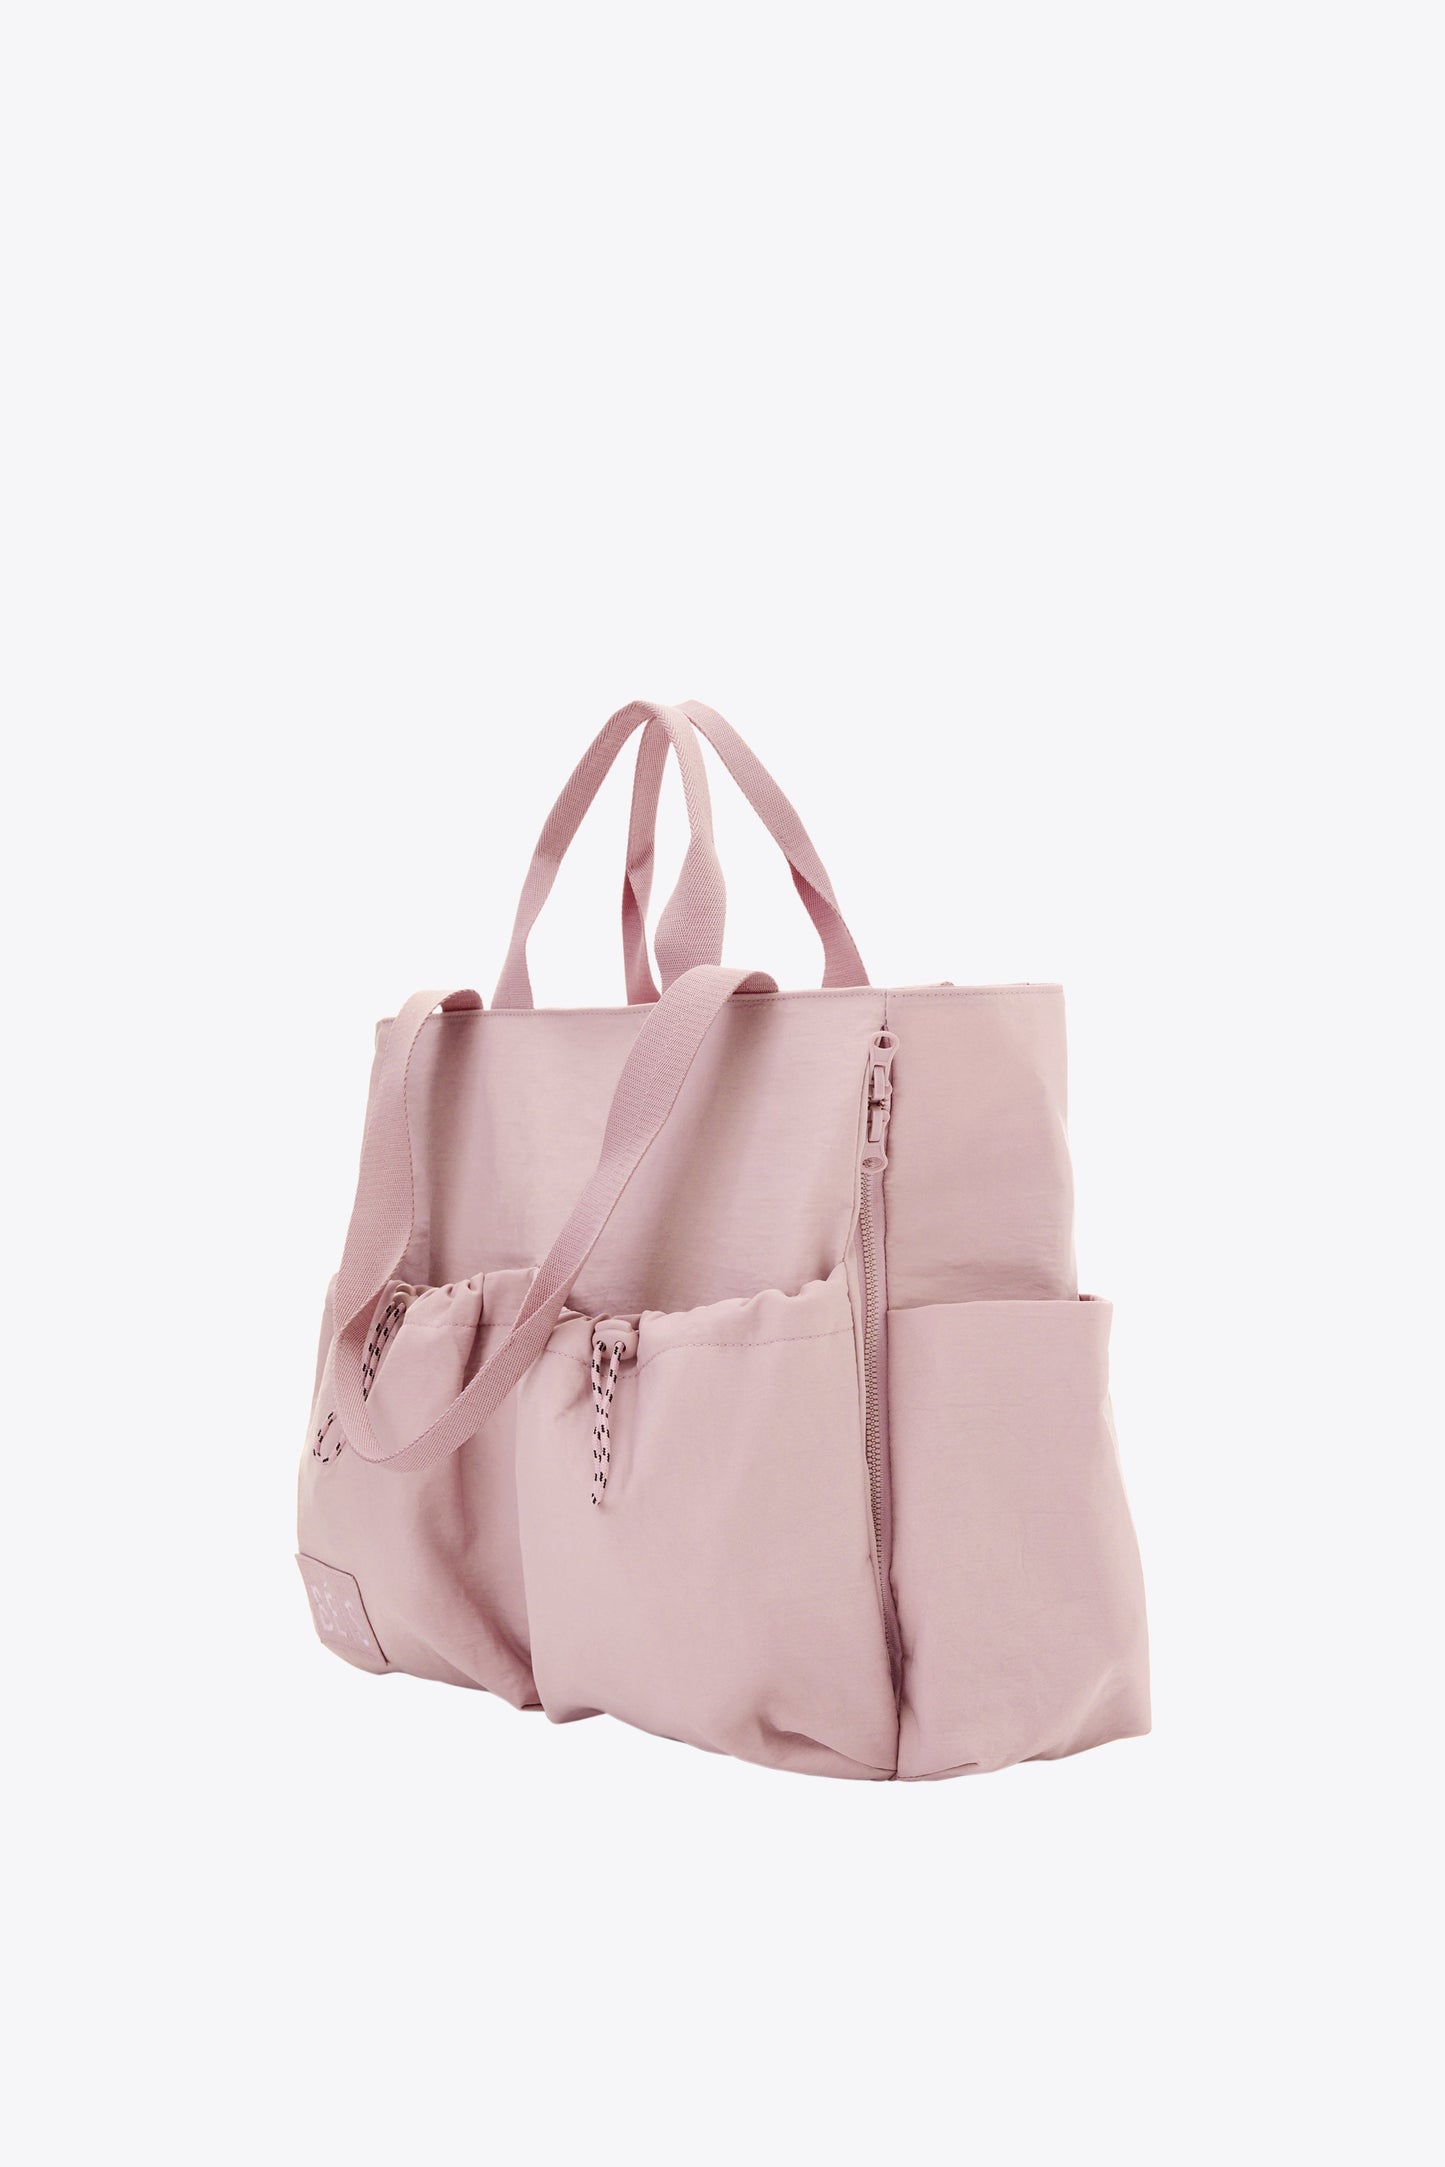 The Sport Carryall in Atlas Pink